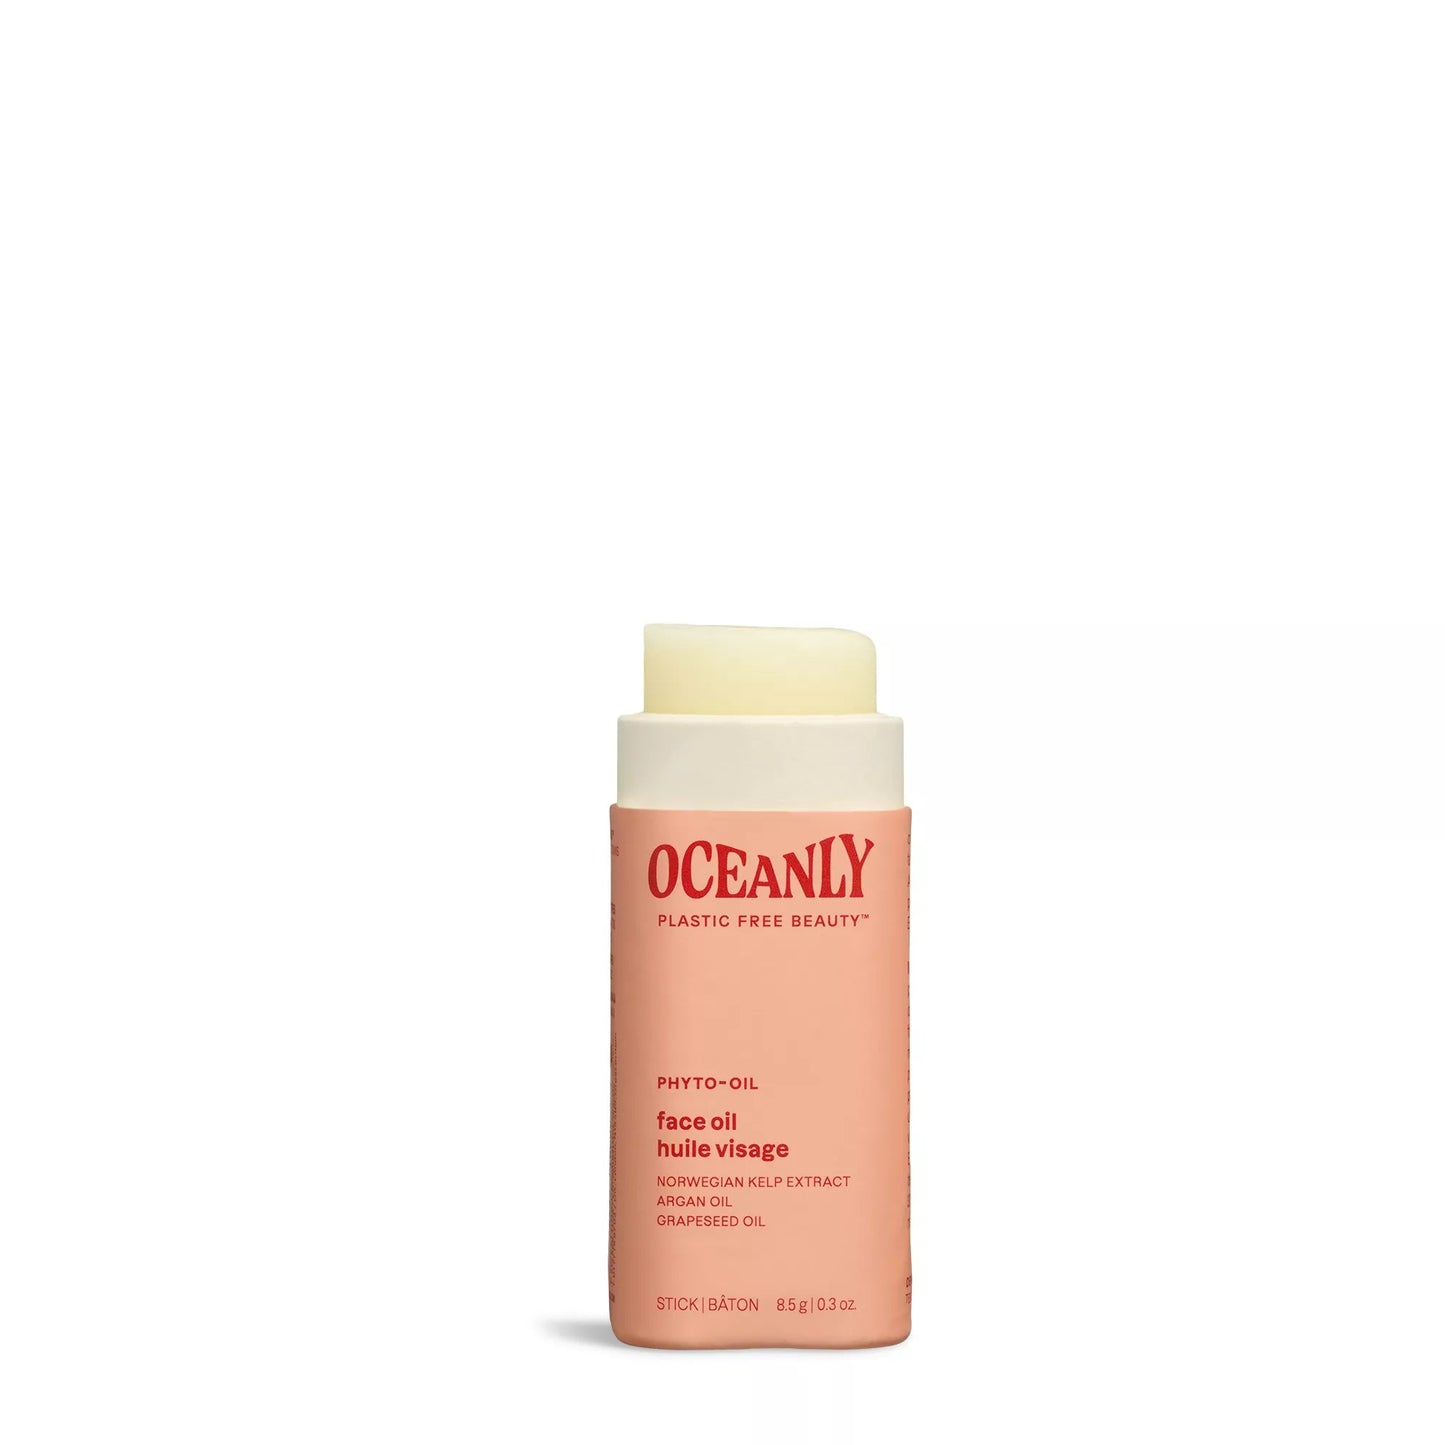 ATTITUDE Oceanly Phyto-Oil Mini Face Oil Unscented 8.5g 16086_en?_main? 8.5g Unscented